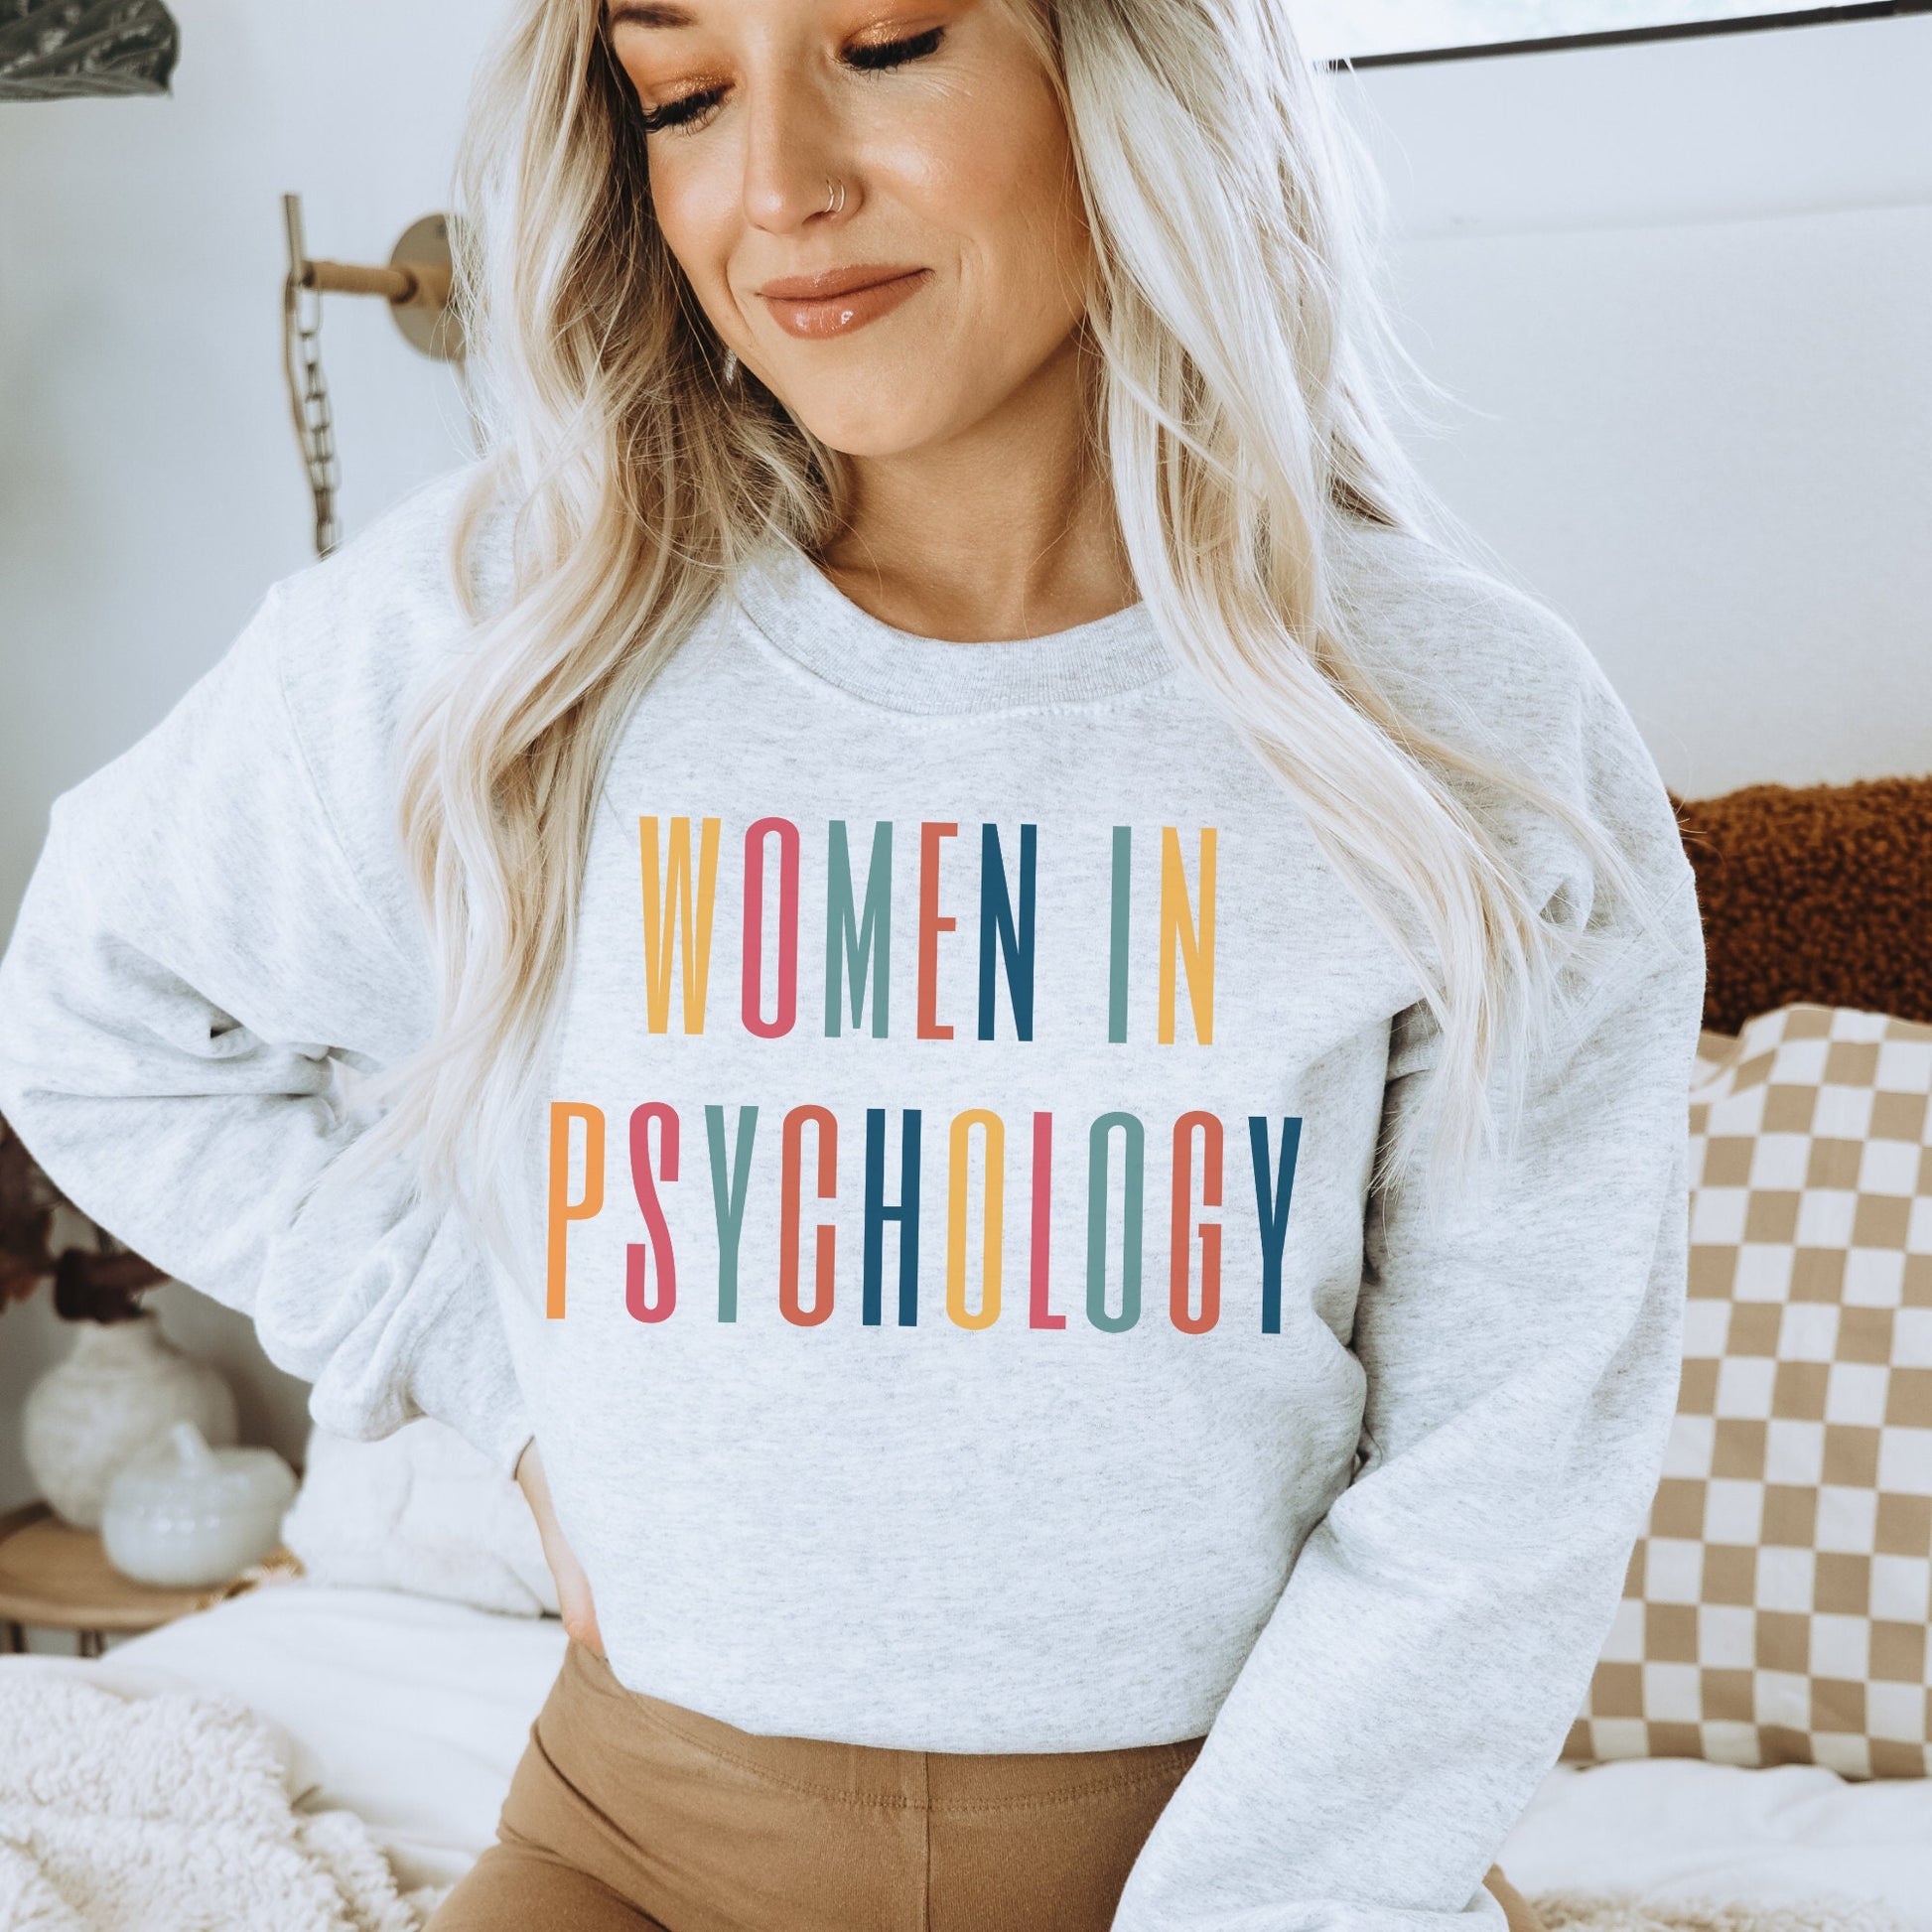 light gray unisex psych sweatshirt that says "women in psychology" in all capital, multicolored letters